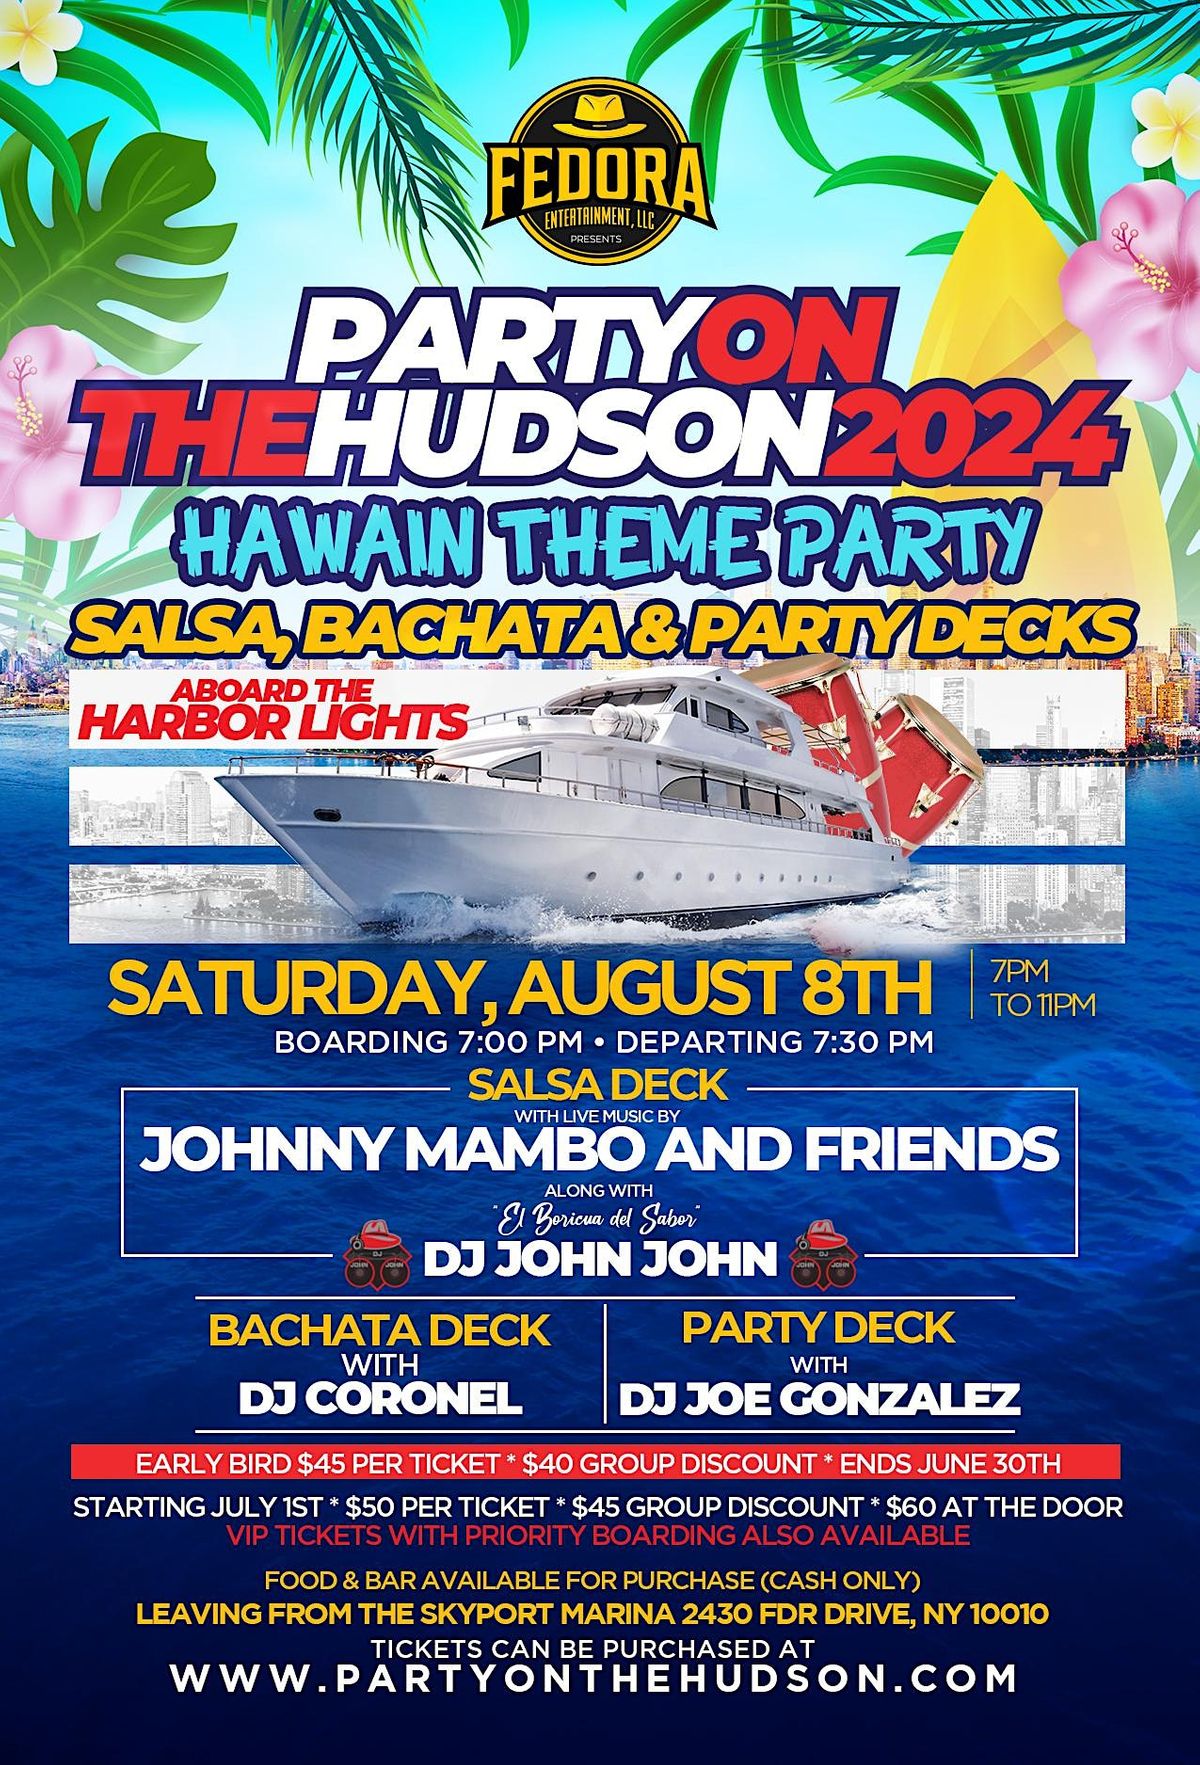 Party On The Hudson HAWIAN THEME PARTY with 3 Decks of Music